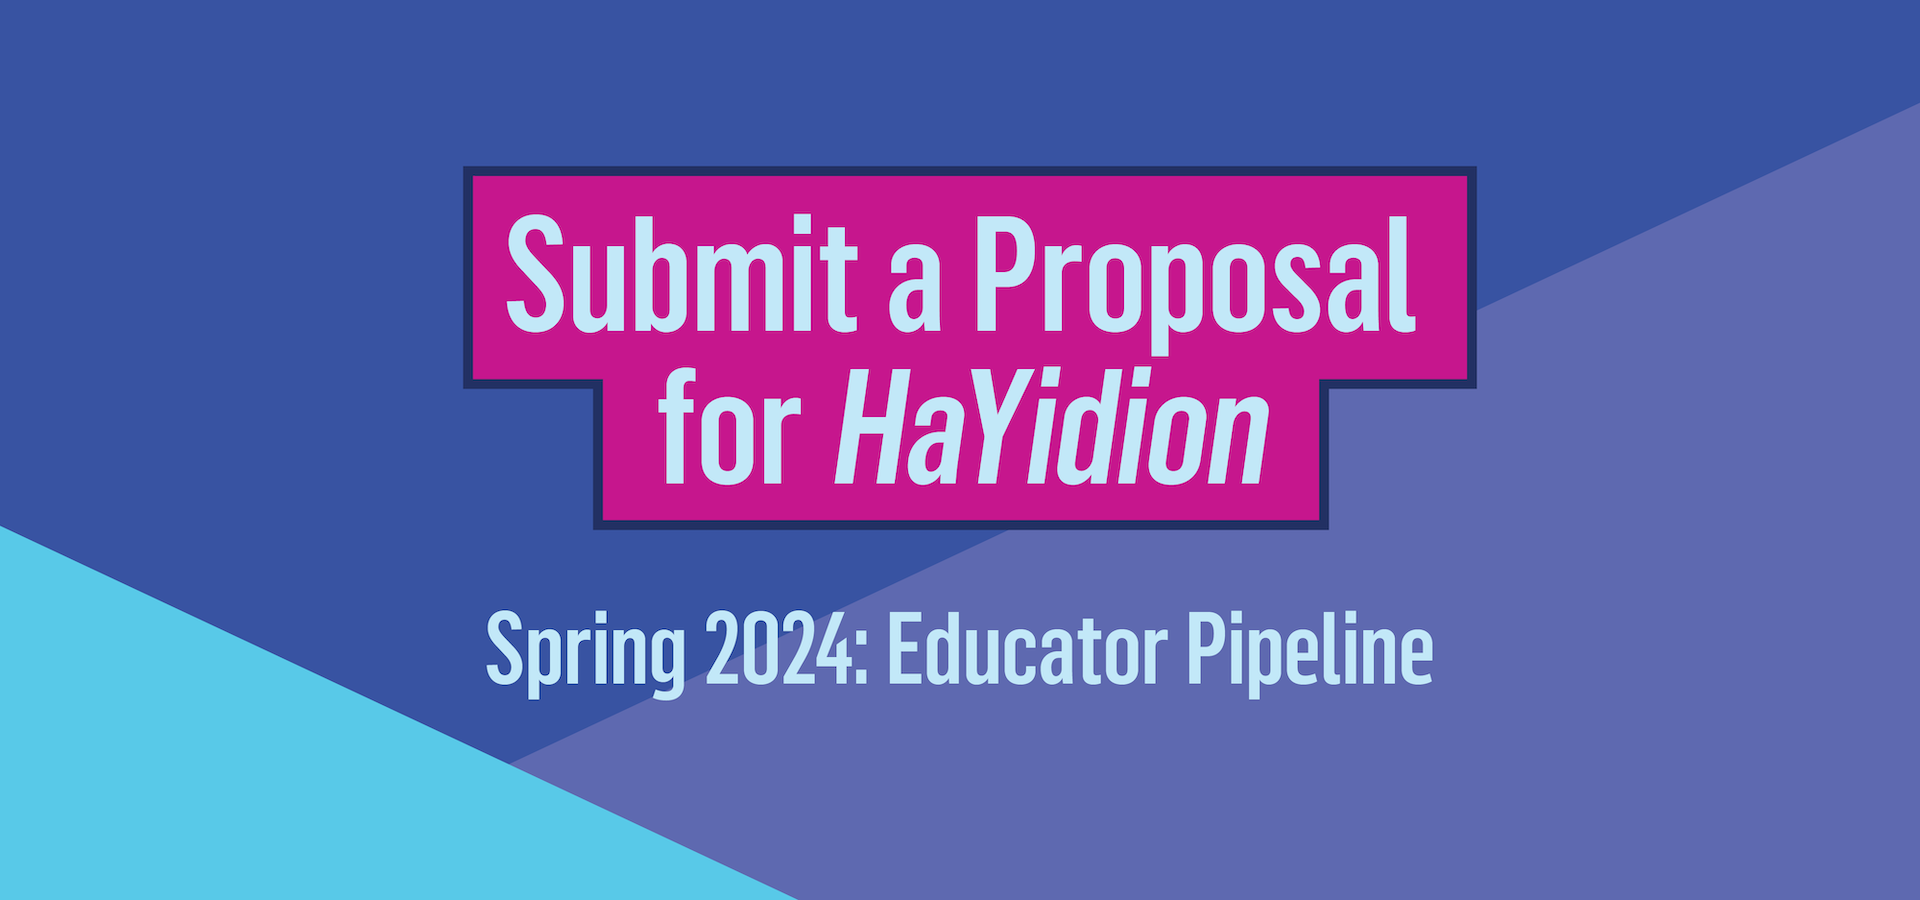 Submit a Proposal for HaYidion Spring 2024: Educator Pipeline